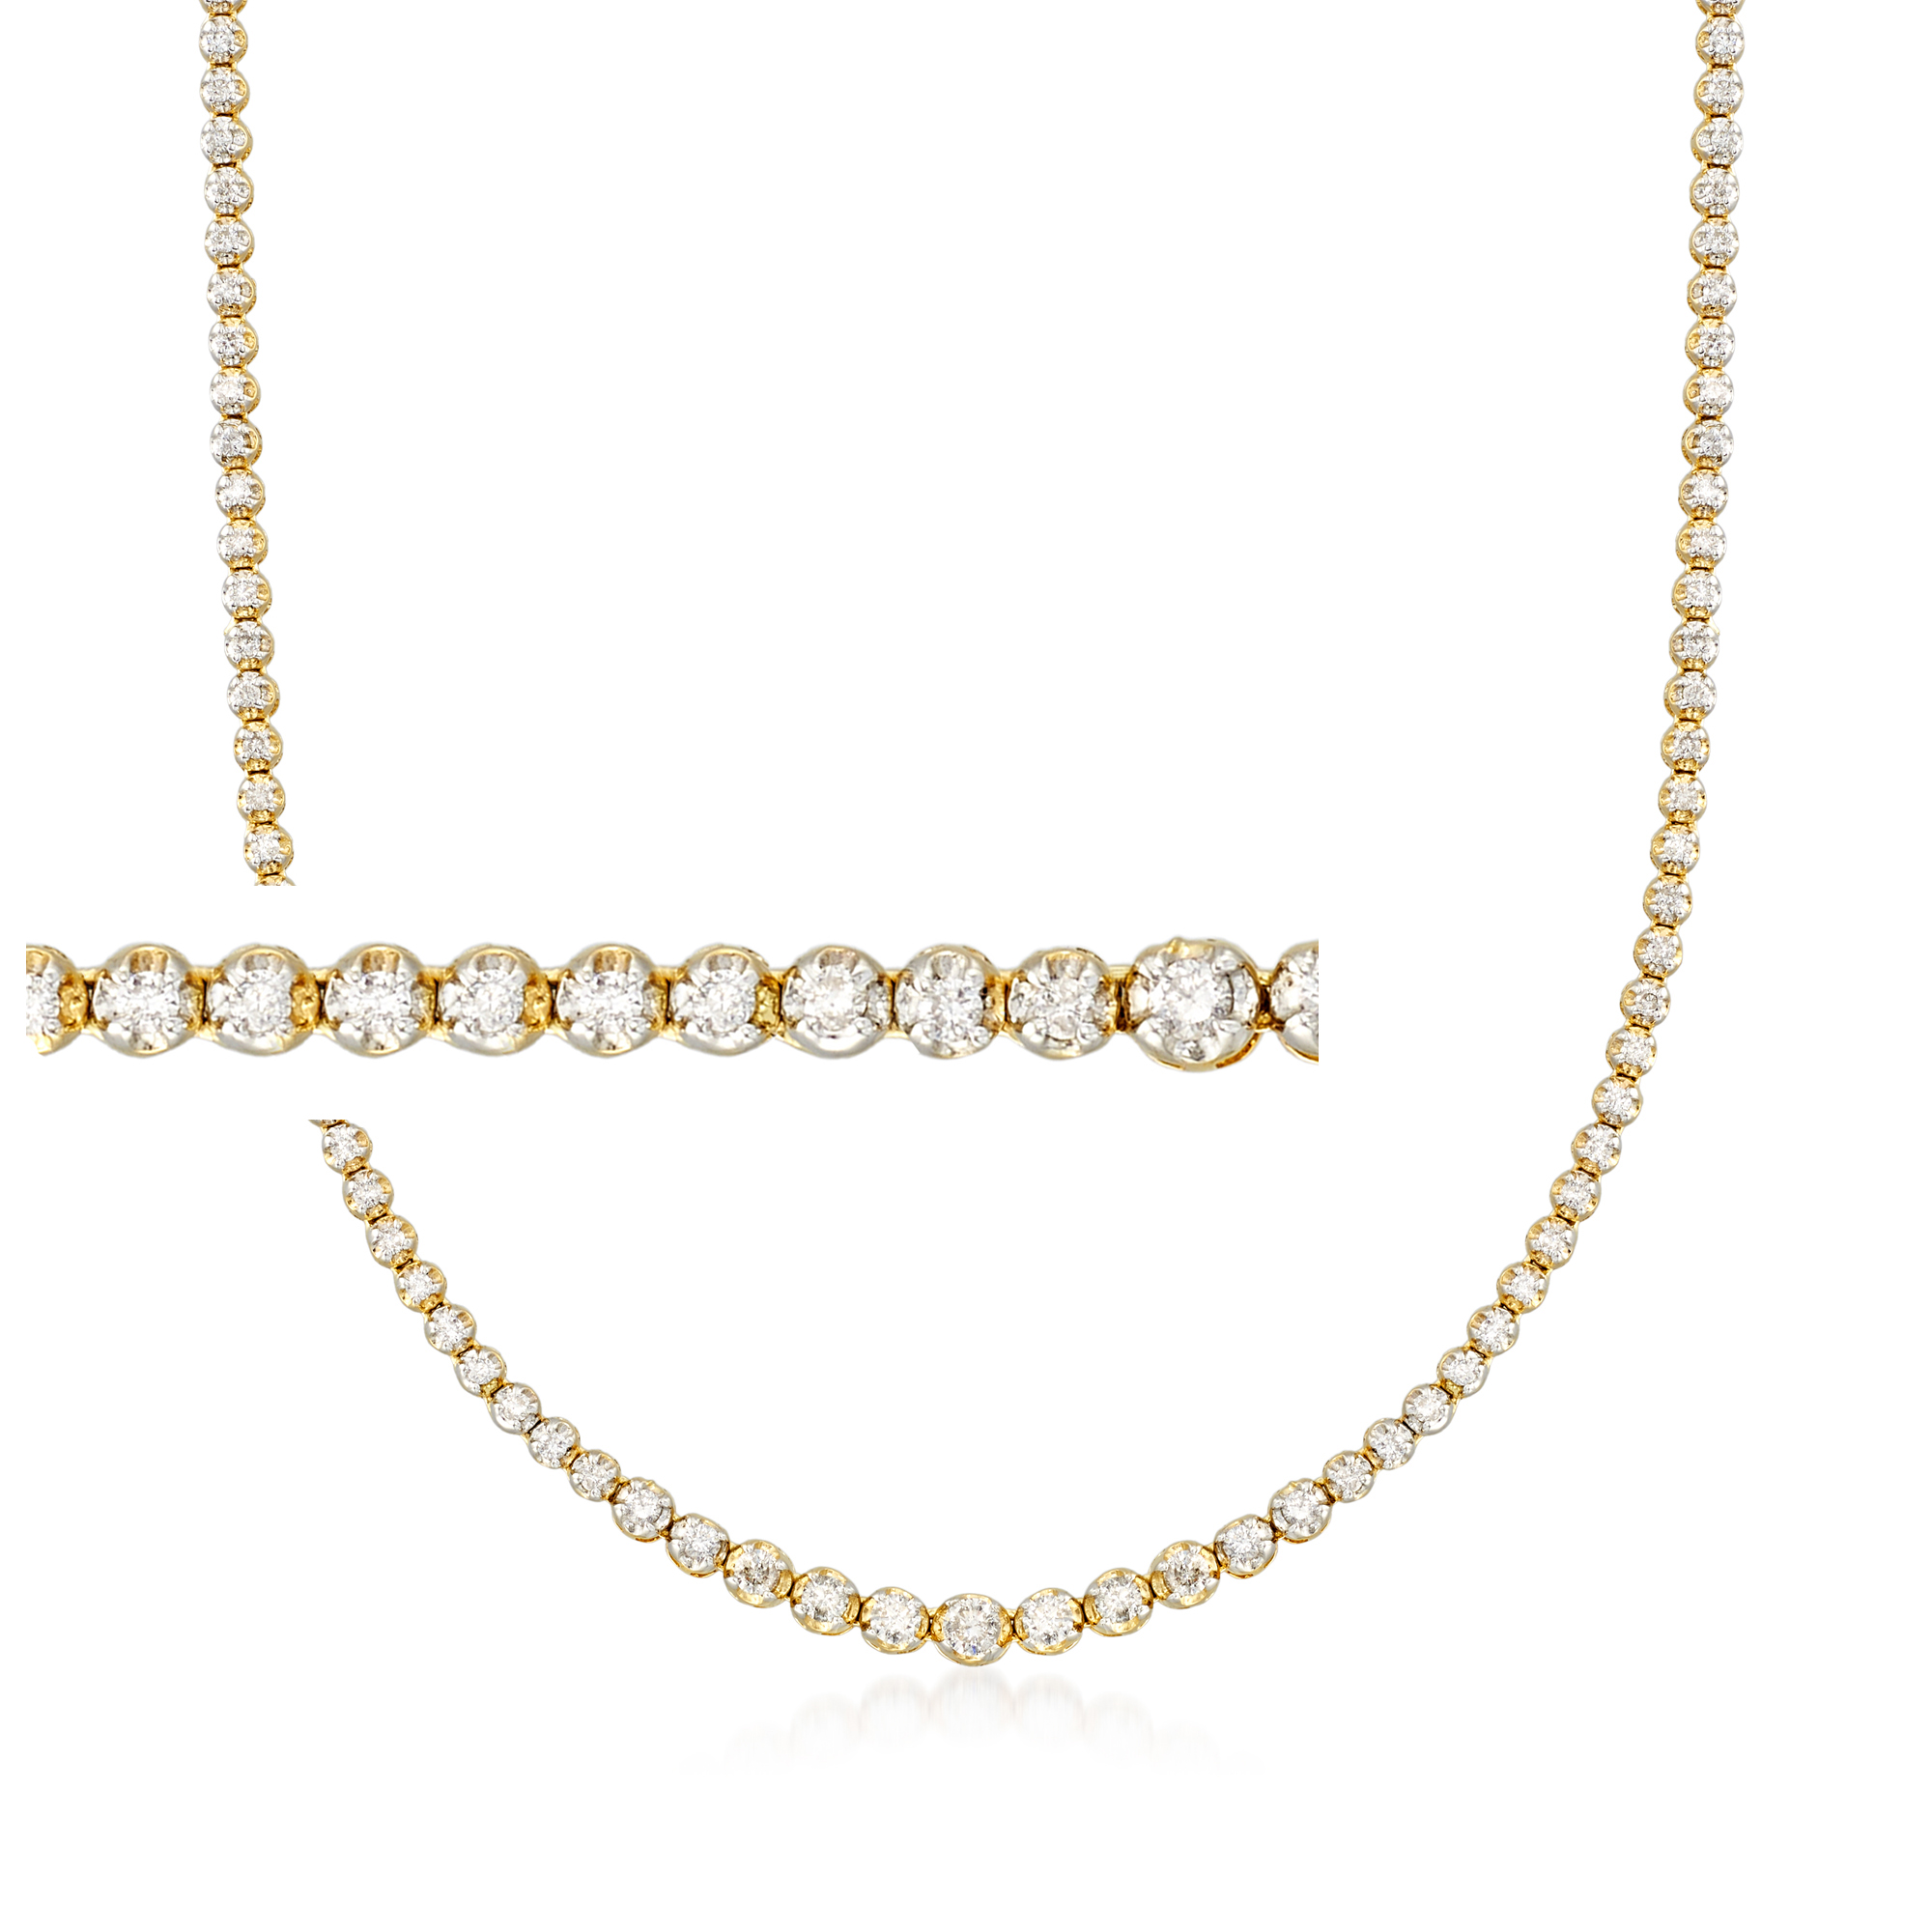 3.00 ct. t.w. Graduated Diamond Tennis Necklace in 14kt Yellow 